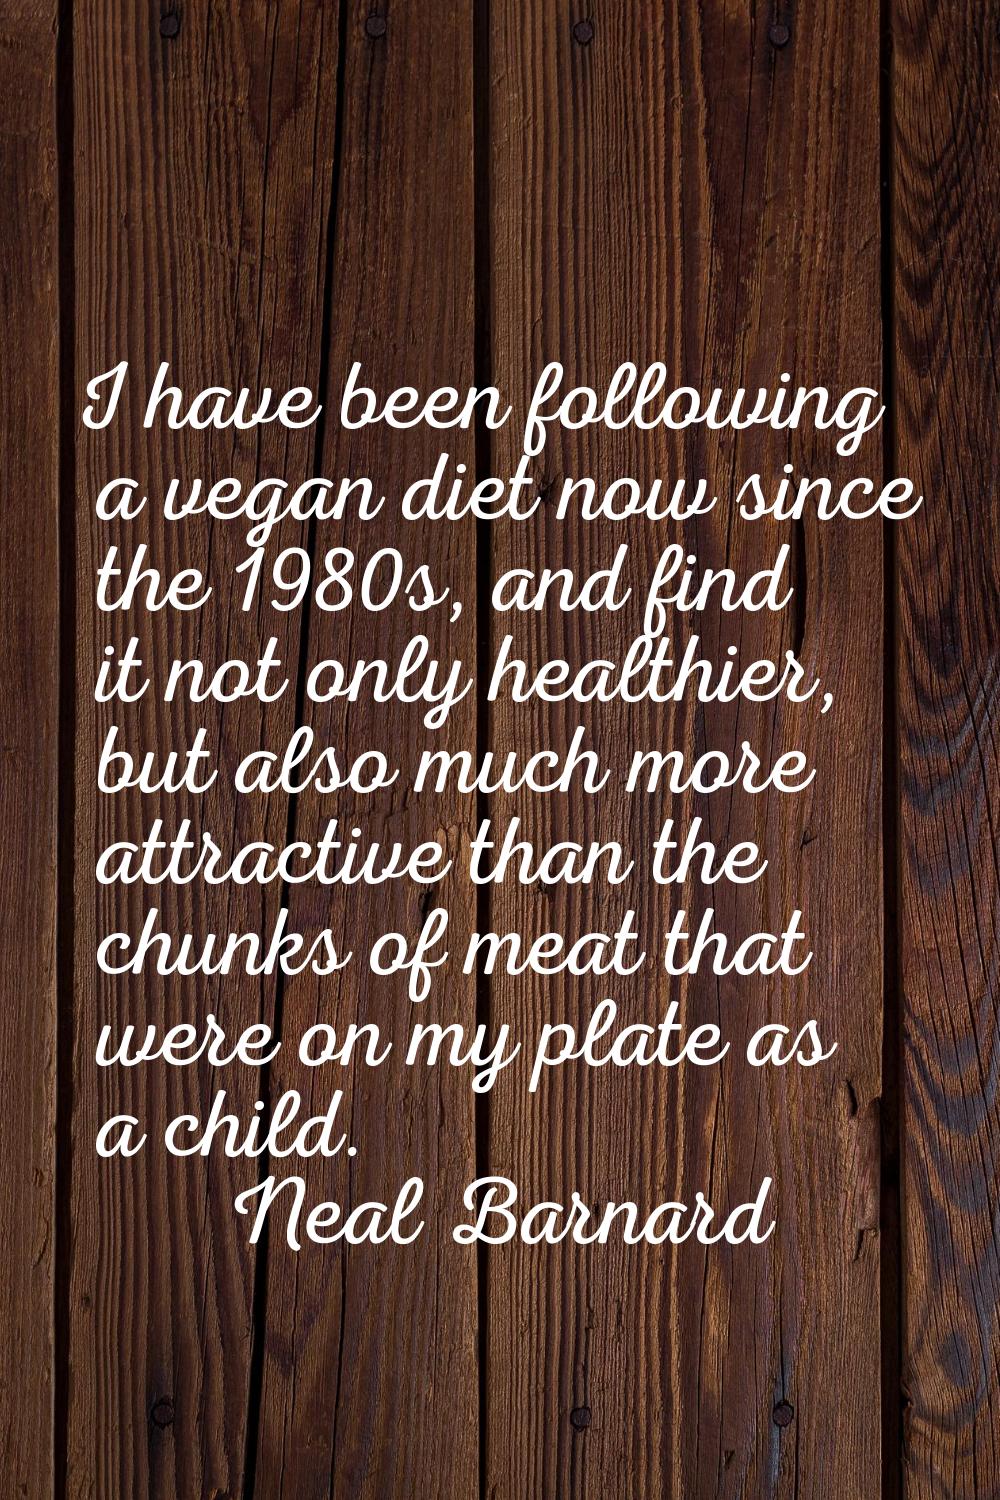 I have been following a vegan diet now since the 1980s, and find it not only healthier, but also mu